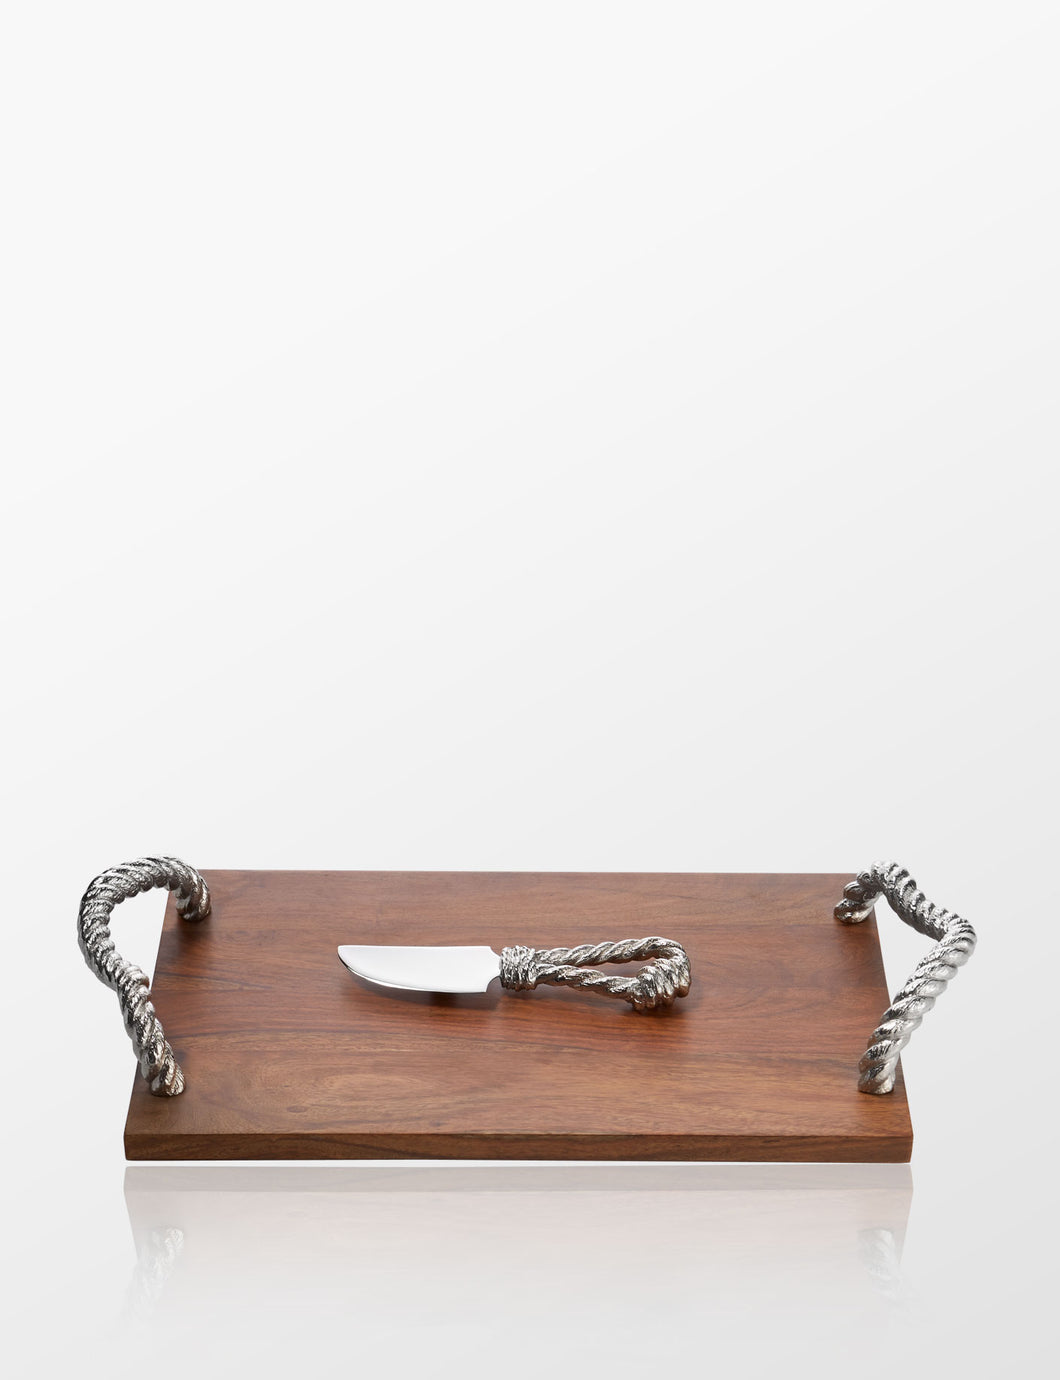 Rope Wooden Cheeseboard with Knife